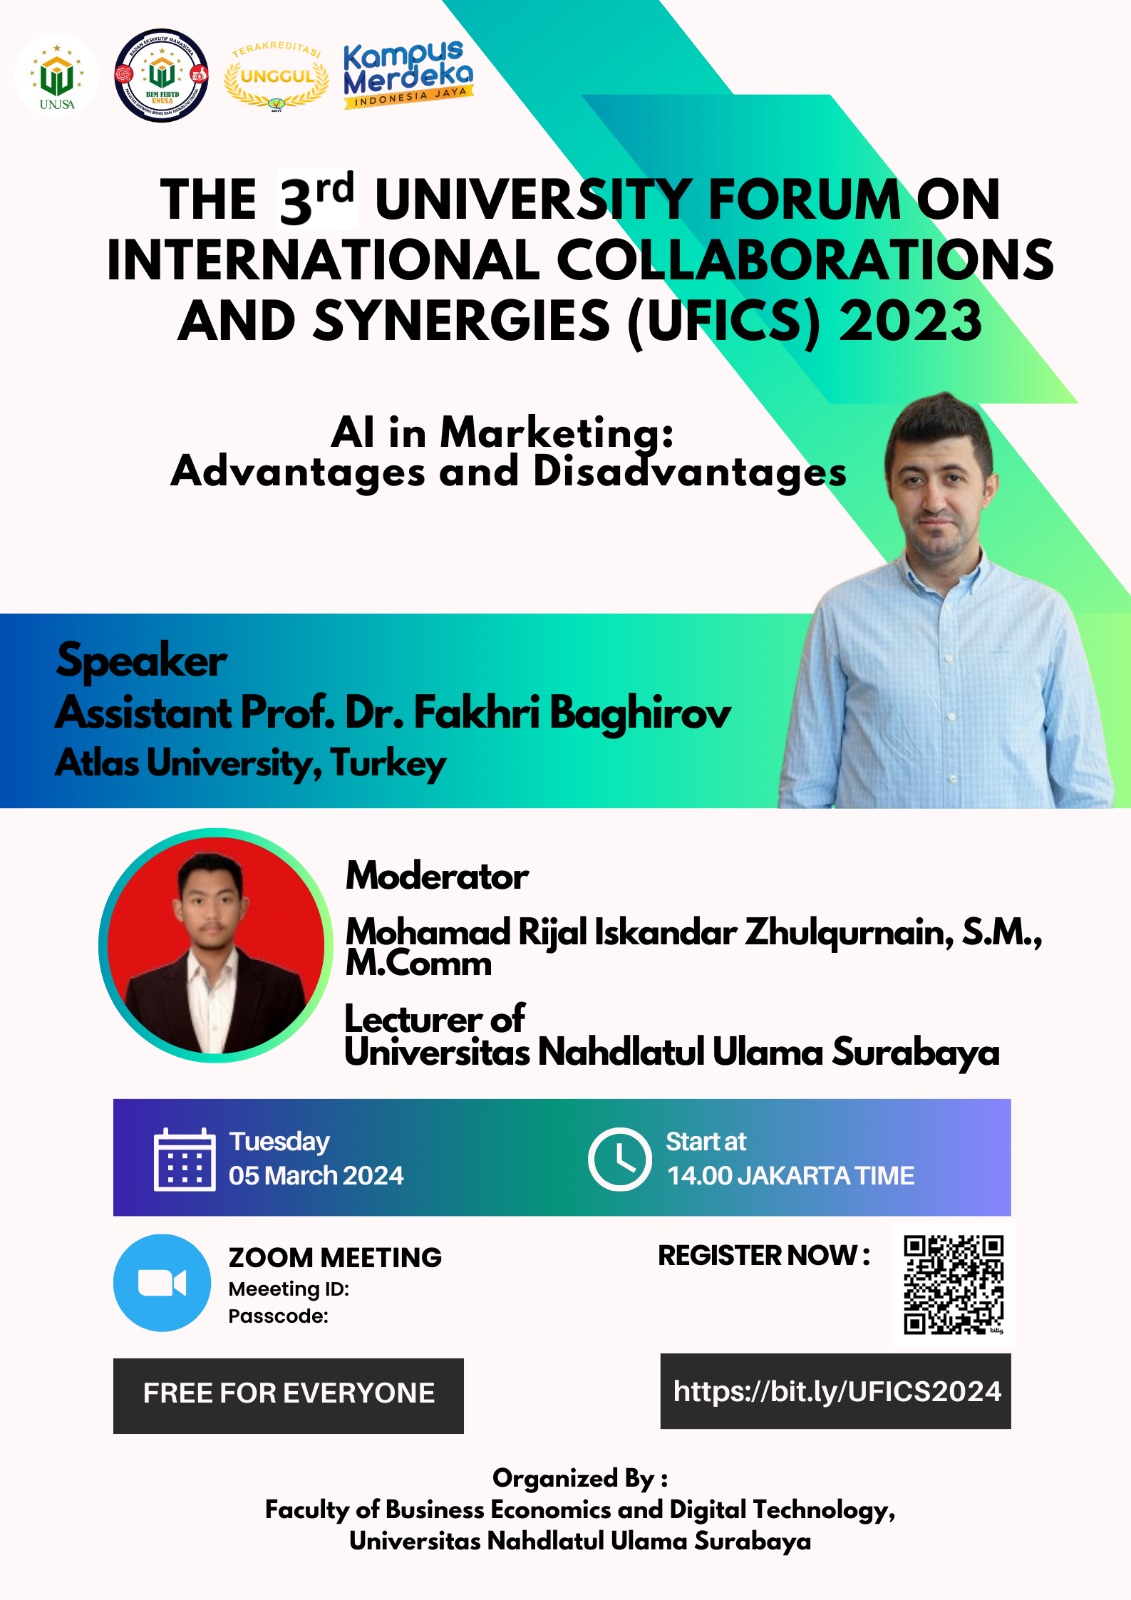 The 3rd University Forum on International Collaborations and Synergies (UFICS) 2023